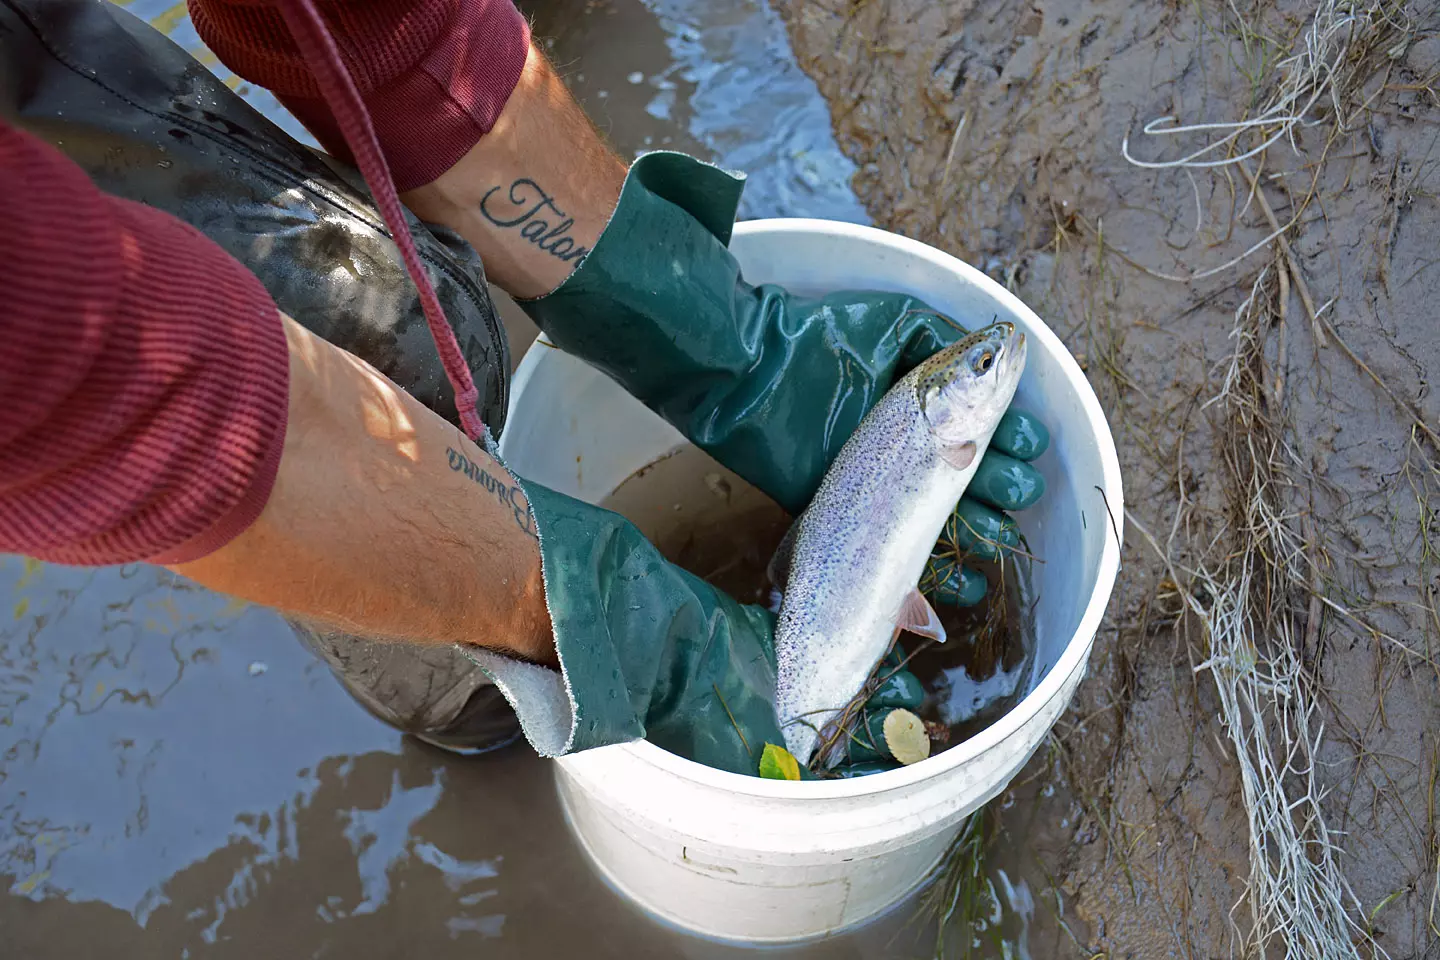 Trout Unlimited on LinkedIn: Reeling In Recovery